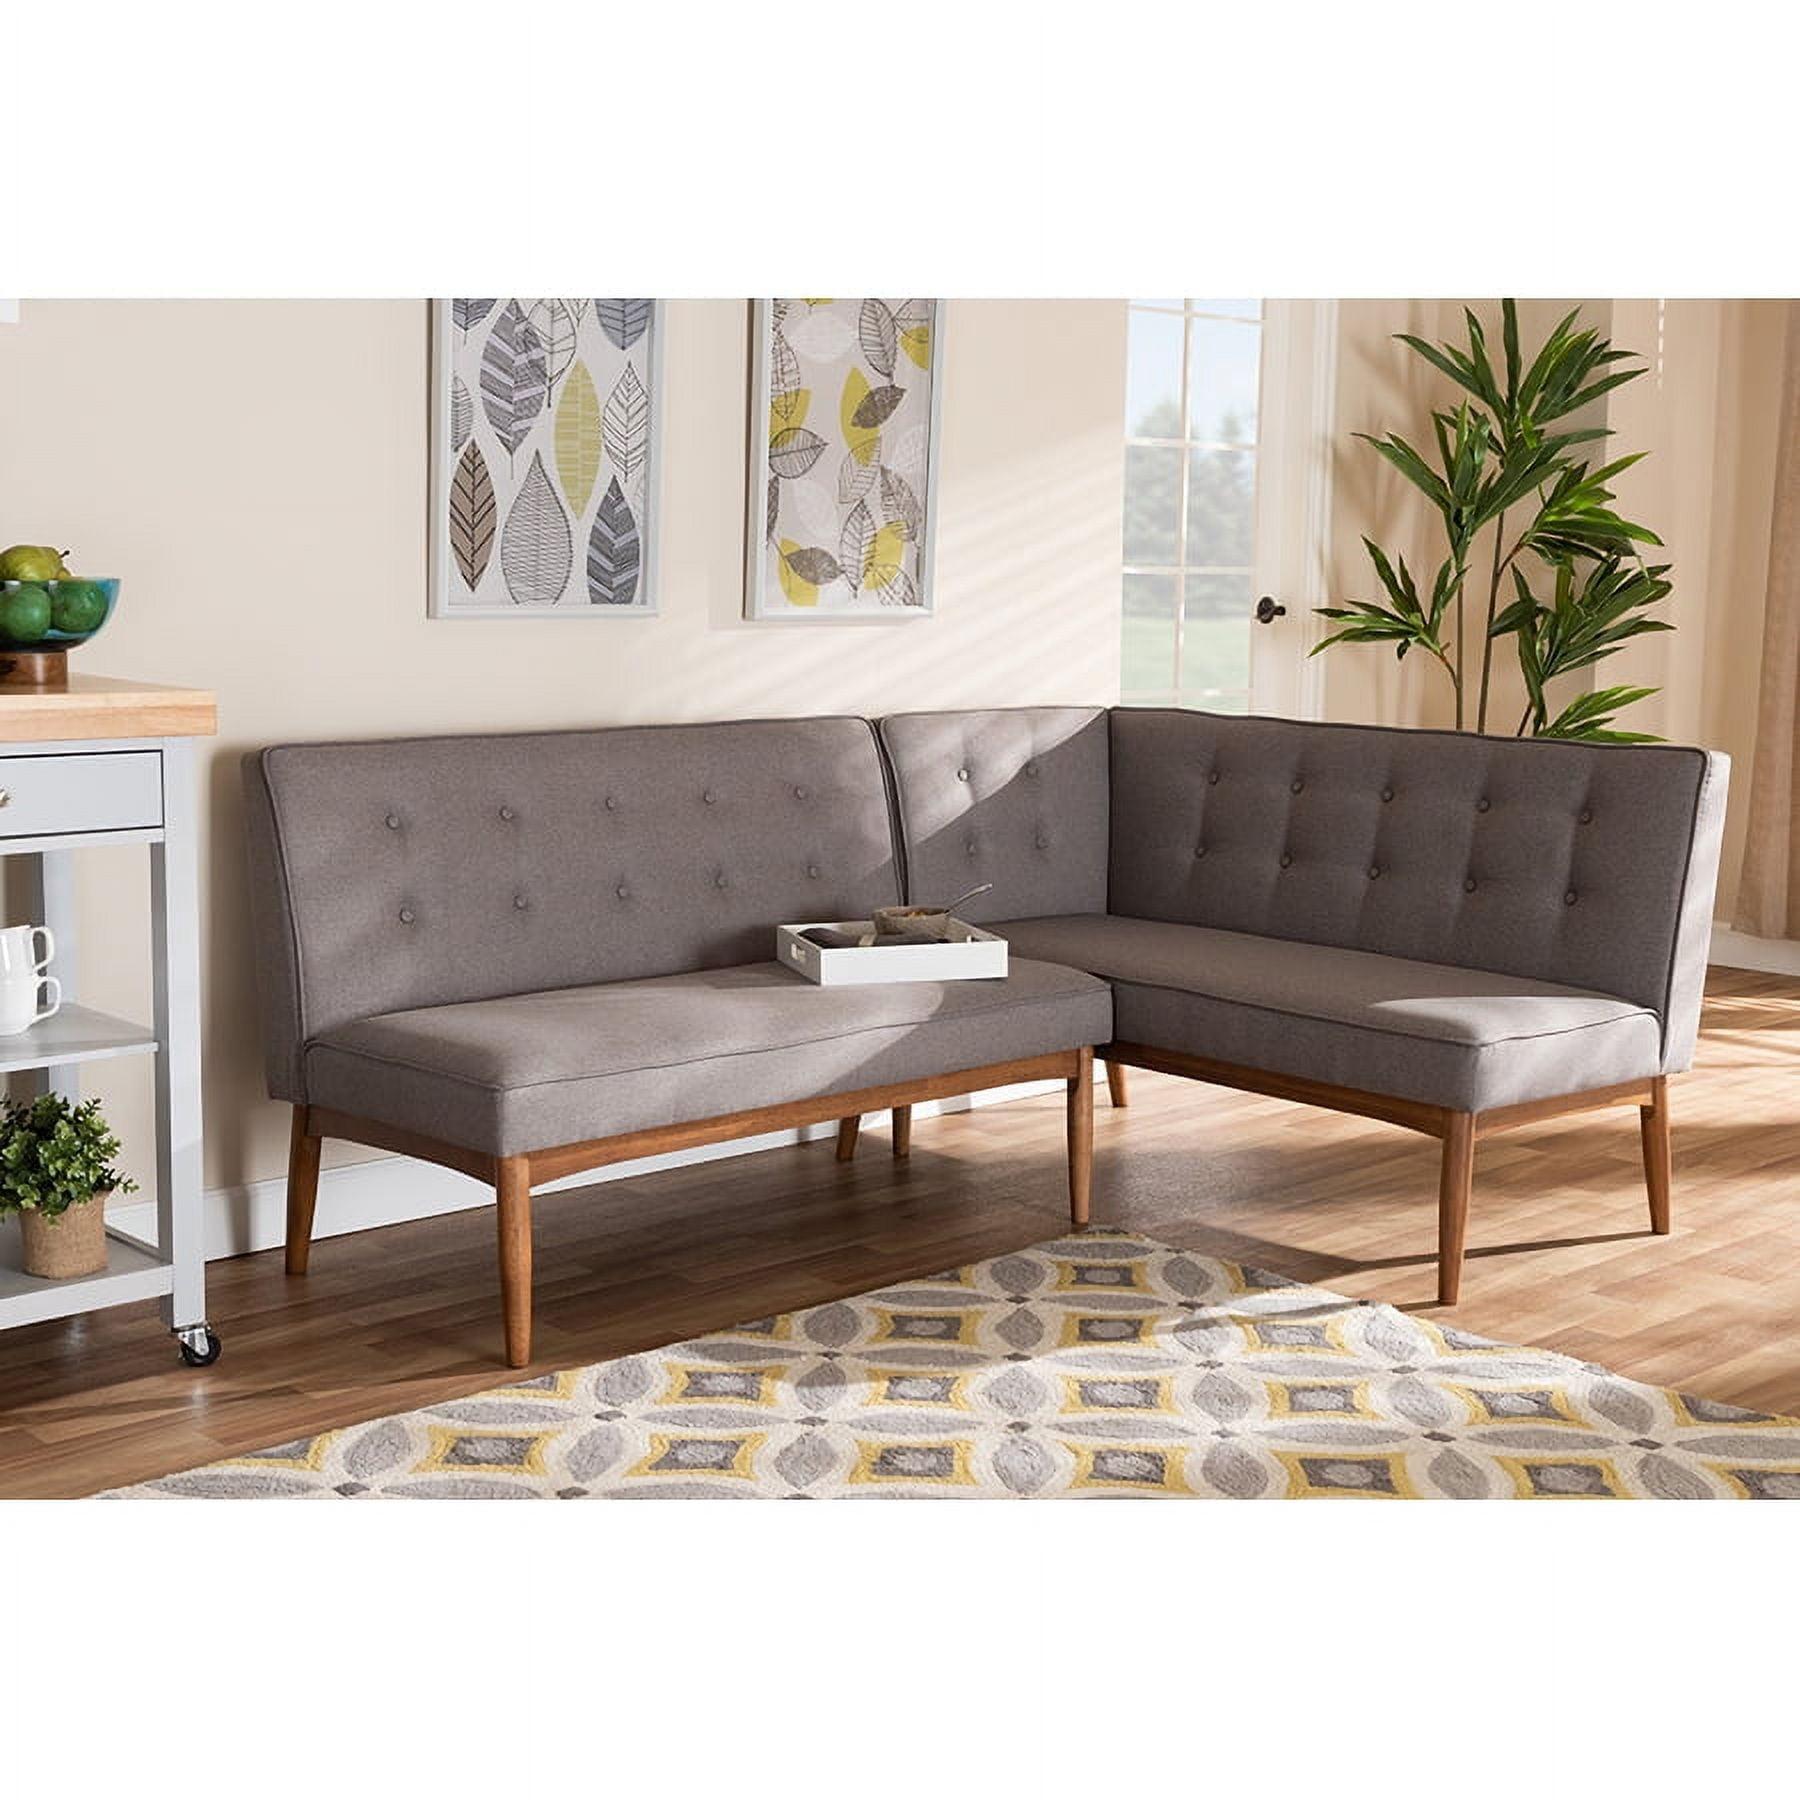 Gray Tufted Linen Two-Piece Armless Wood Banquette Set